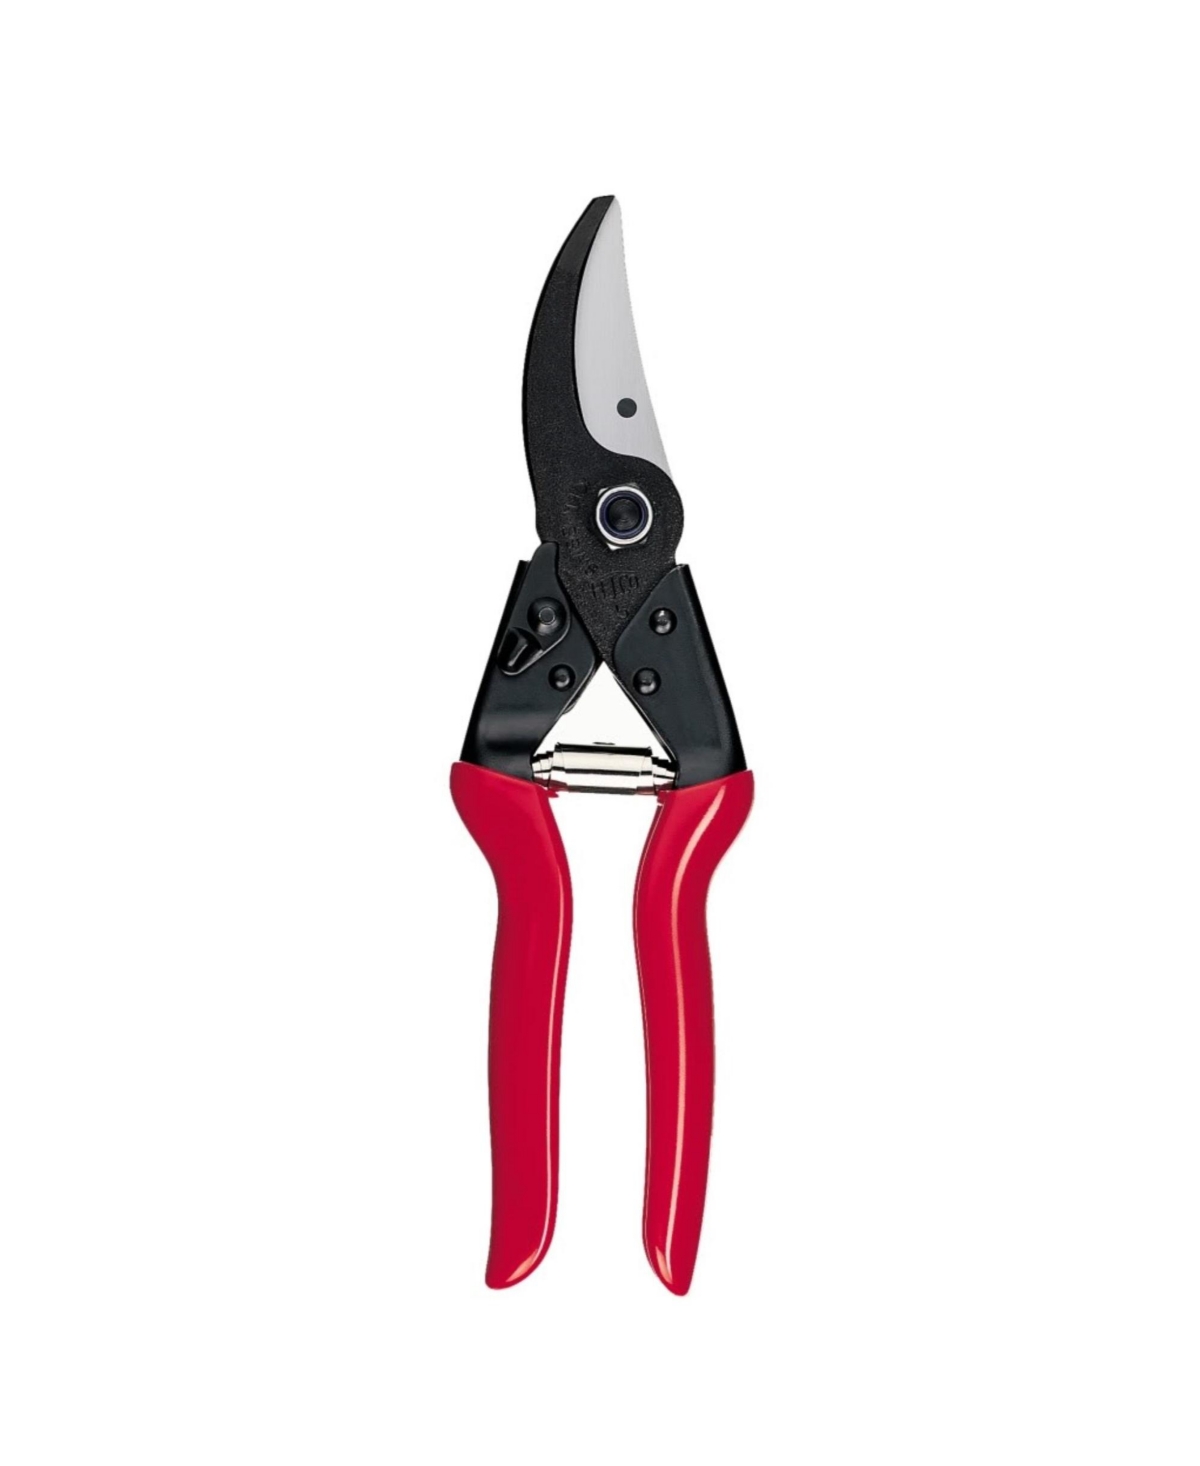 F-5 High Performance One-Hand Garden Pruning Shears - Red